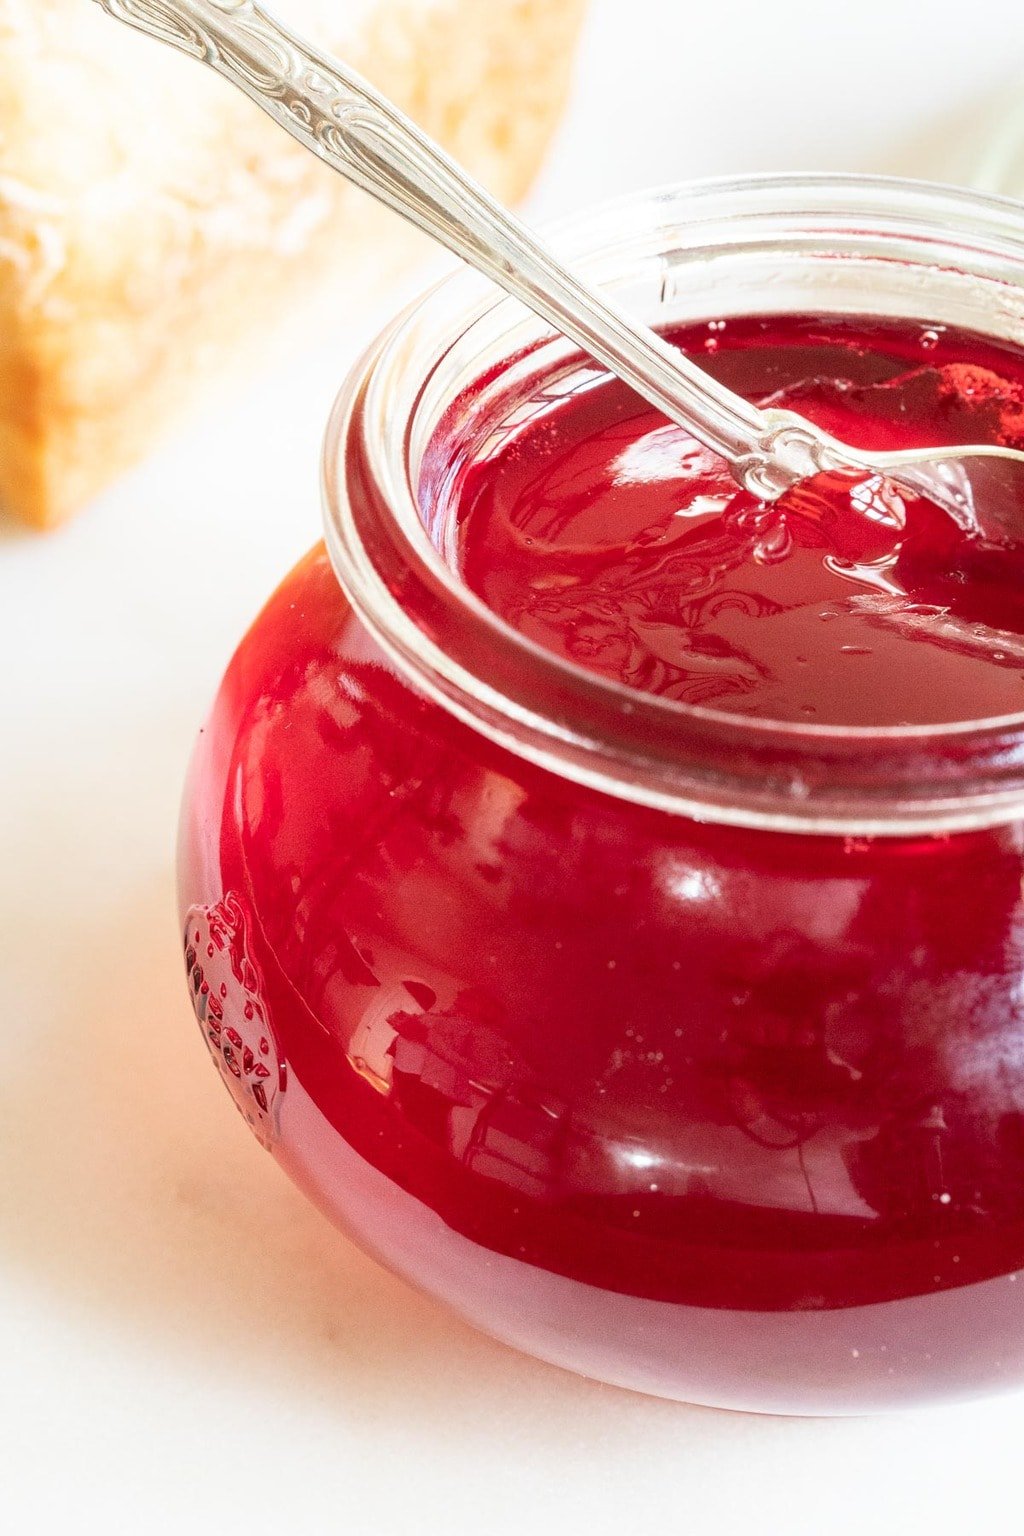 Vertical closeup photo of a glass Weck decorative canning jar of Easy Blackberry Jelly.